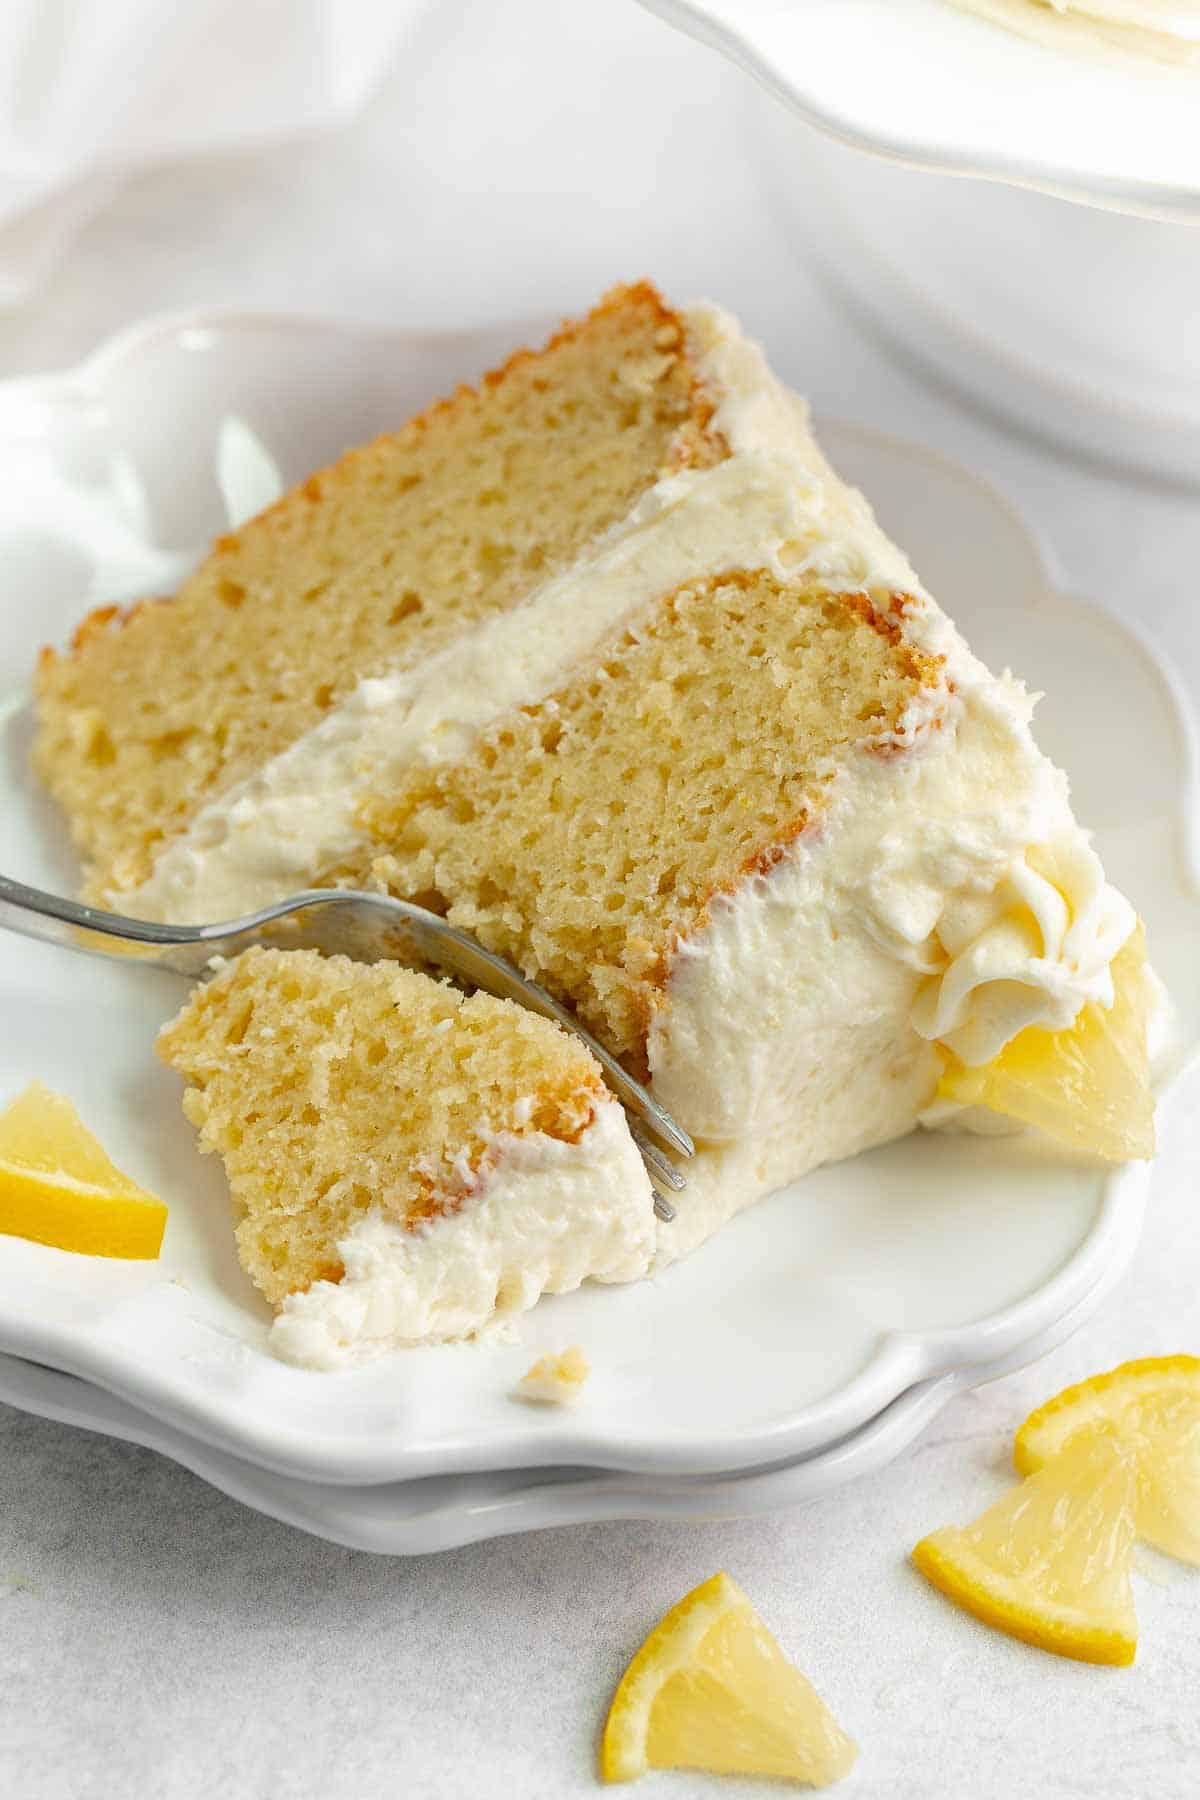 A piece of lemon cake on a plate with a fork cutting into it.